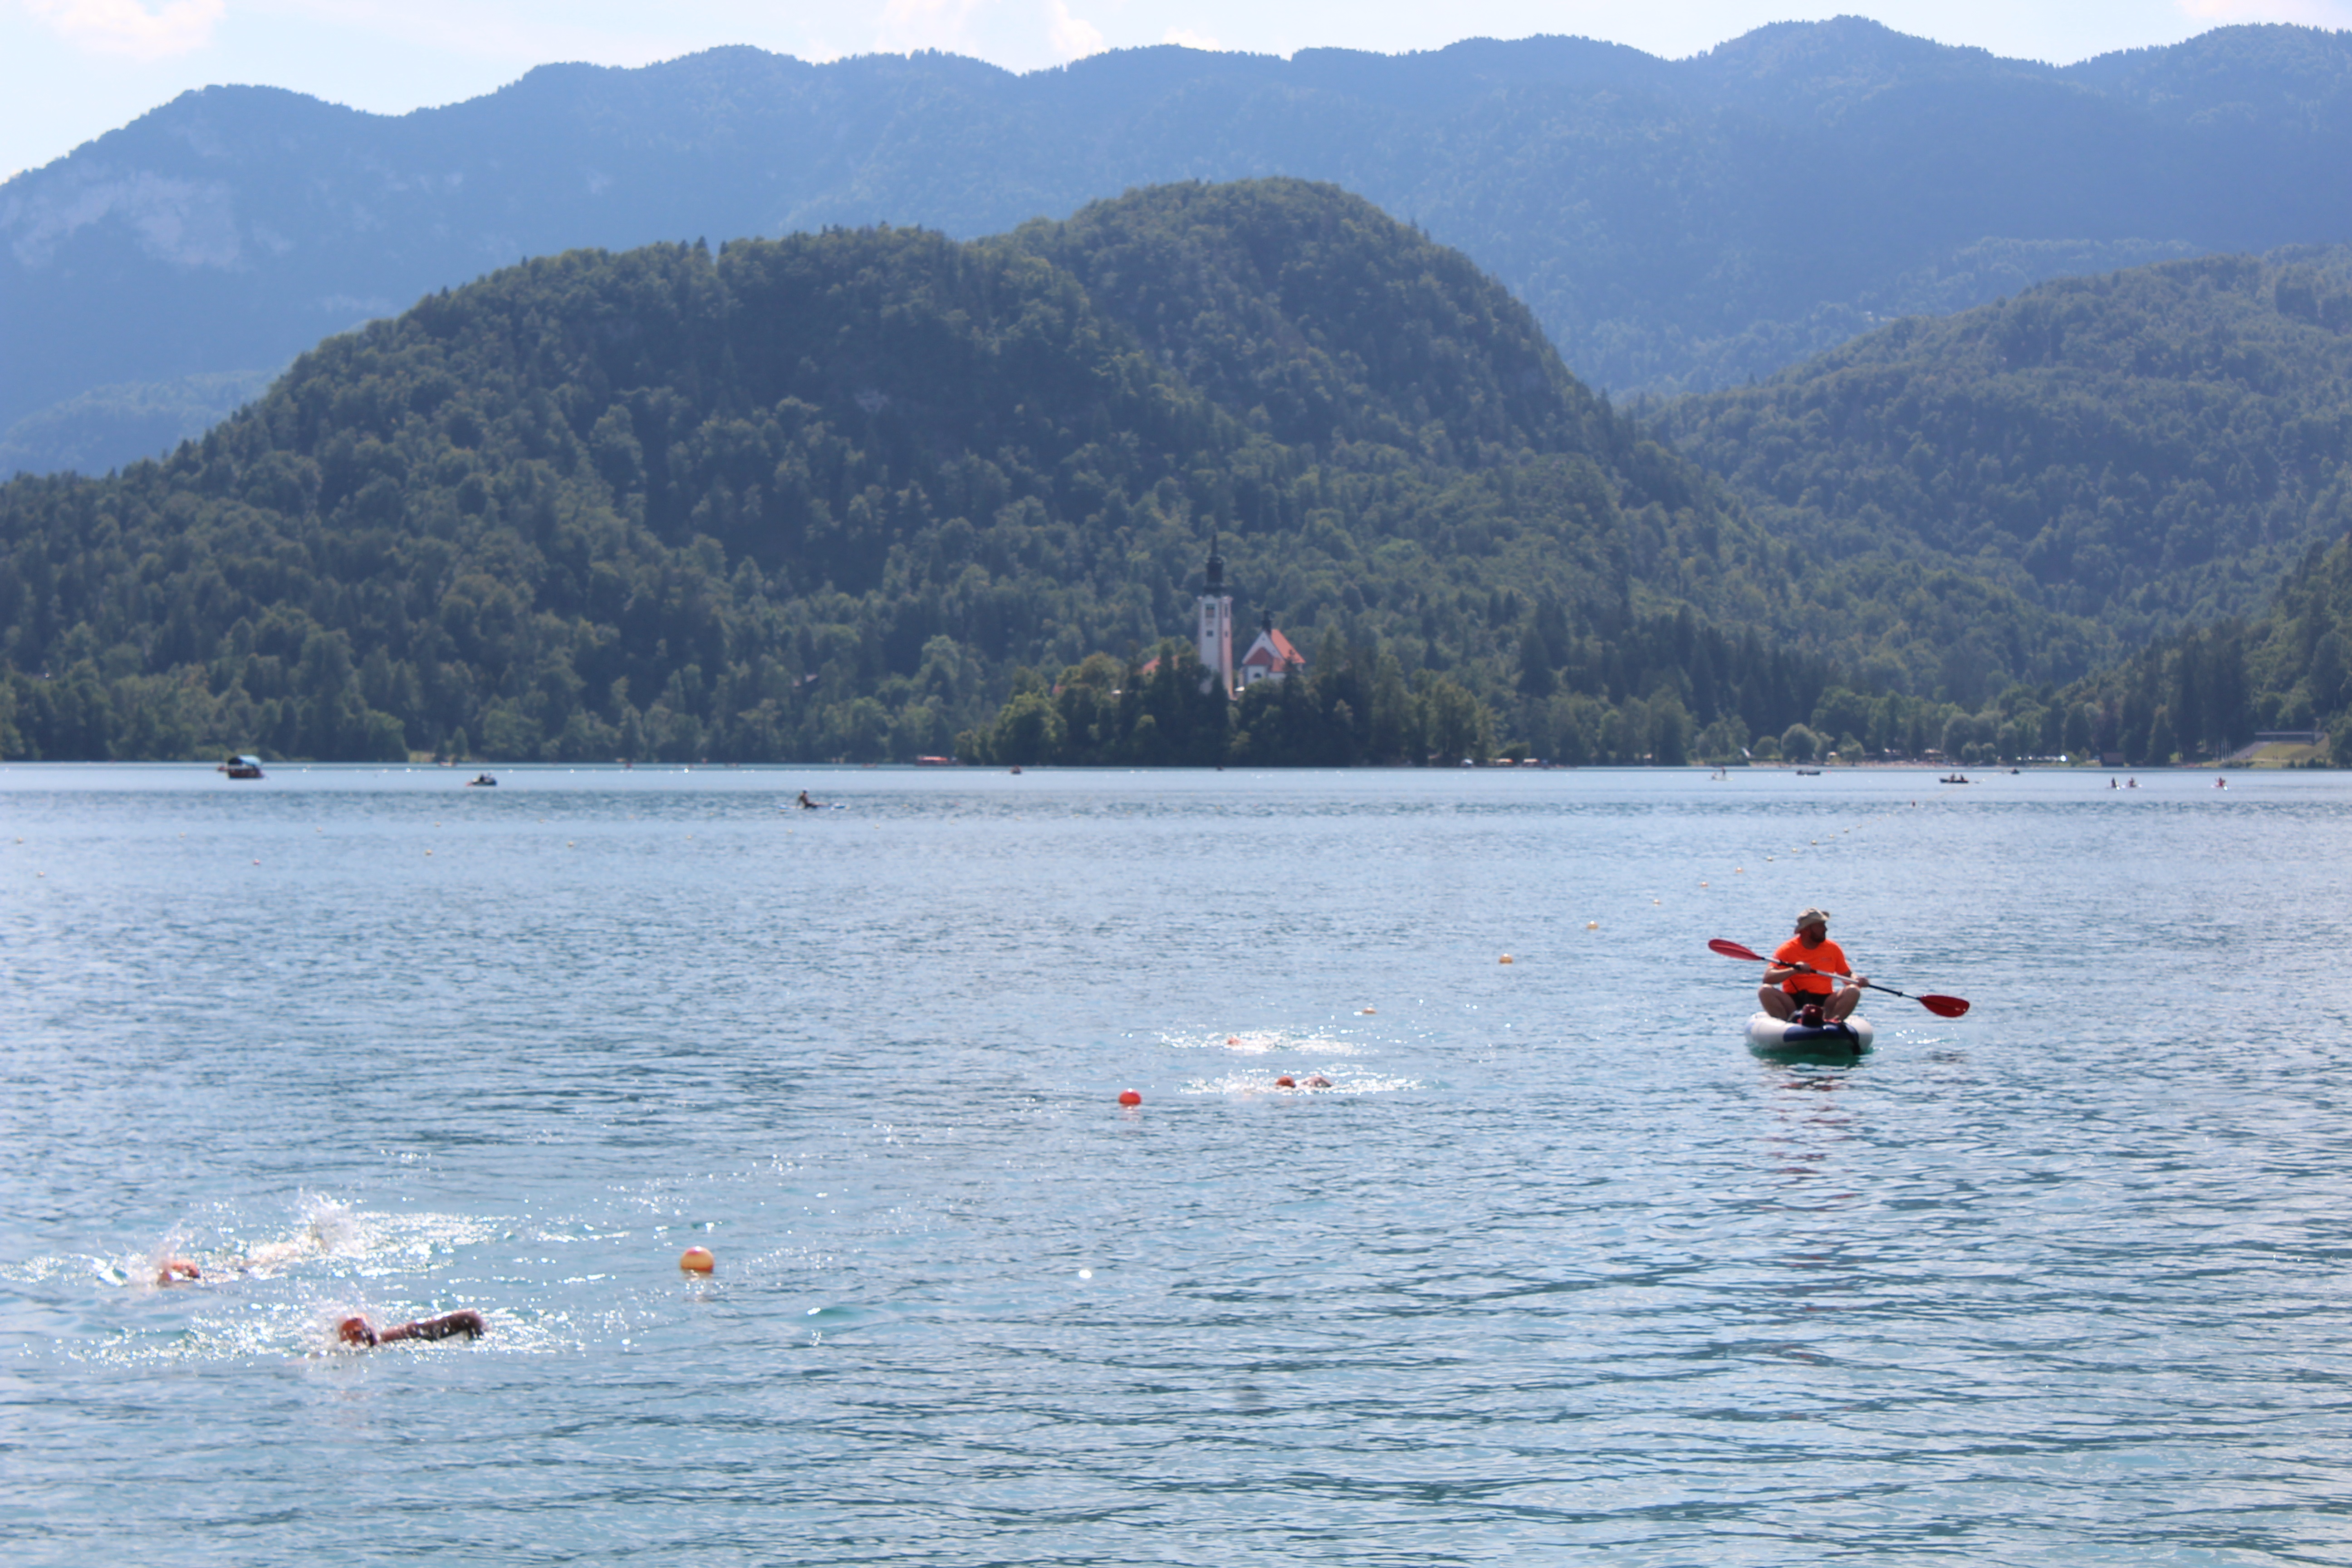 view of the lake with a few swim caps and arms of swimmers, kayaker/guide in a bright orange shirt, mountains in the background and a very small view of the church on the island in the middle of the lake.